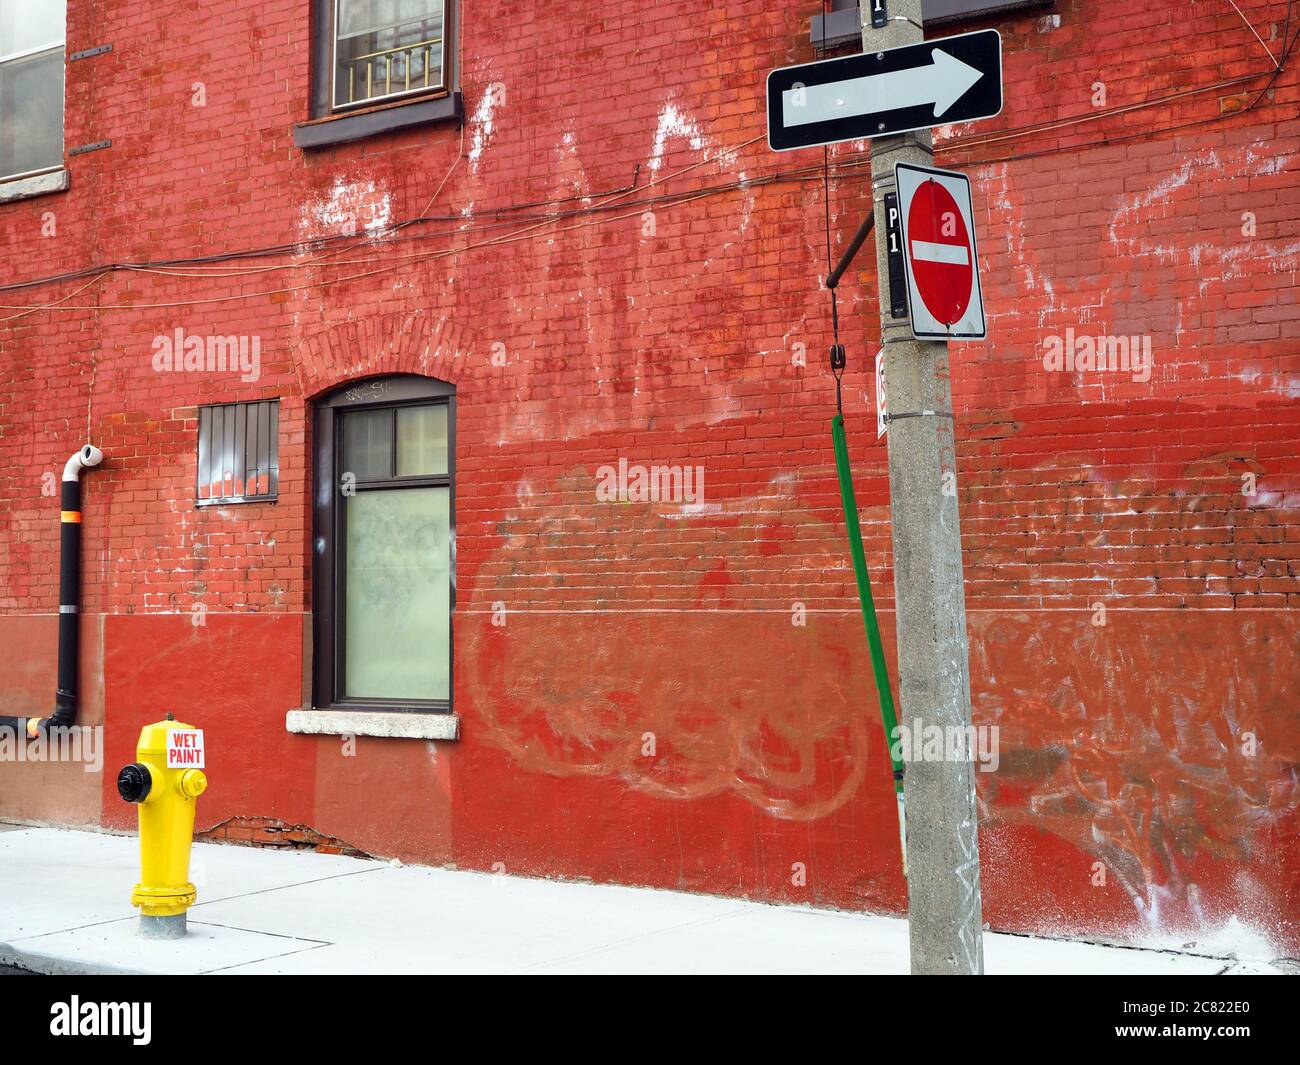 Red brick building with yellow fire hydrant, Toronto, Ontario, Canada Stock Photo